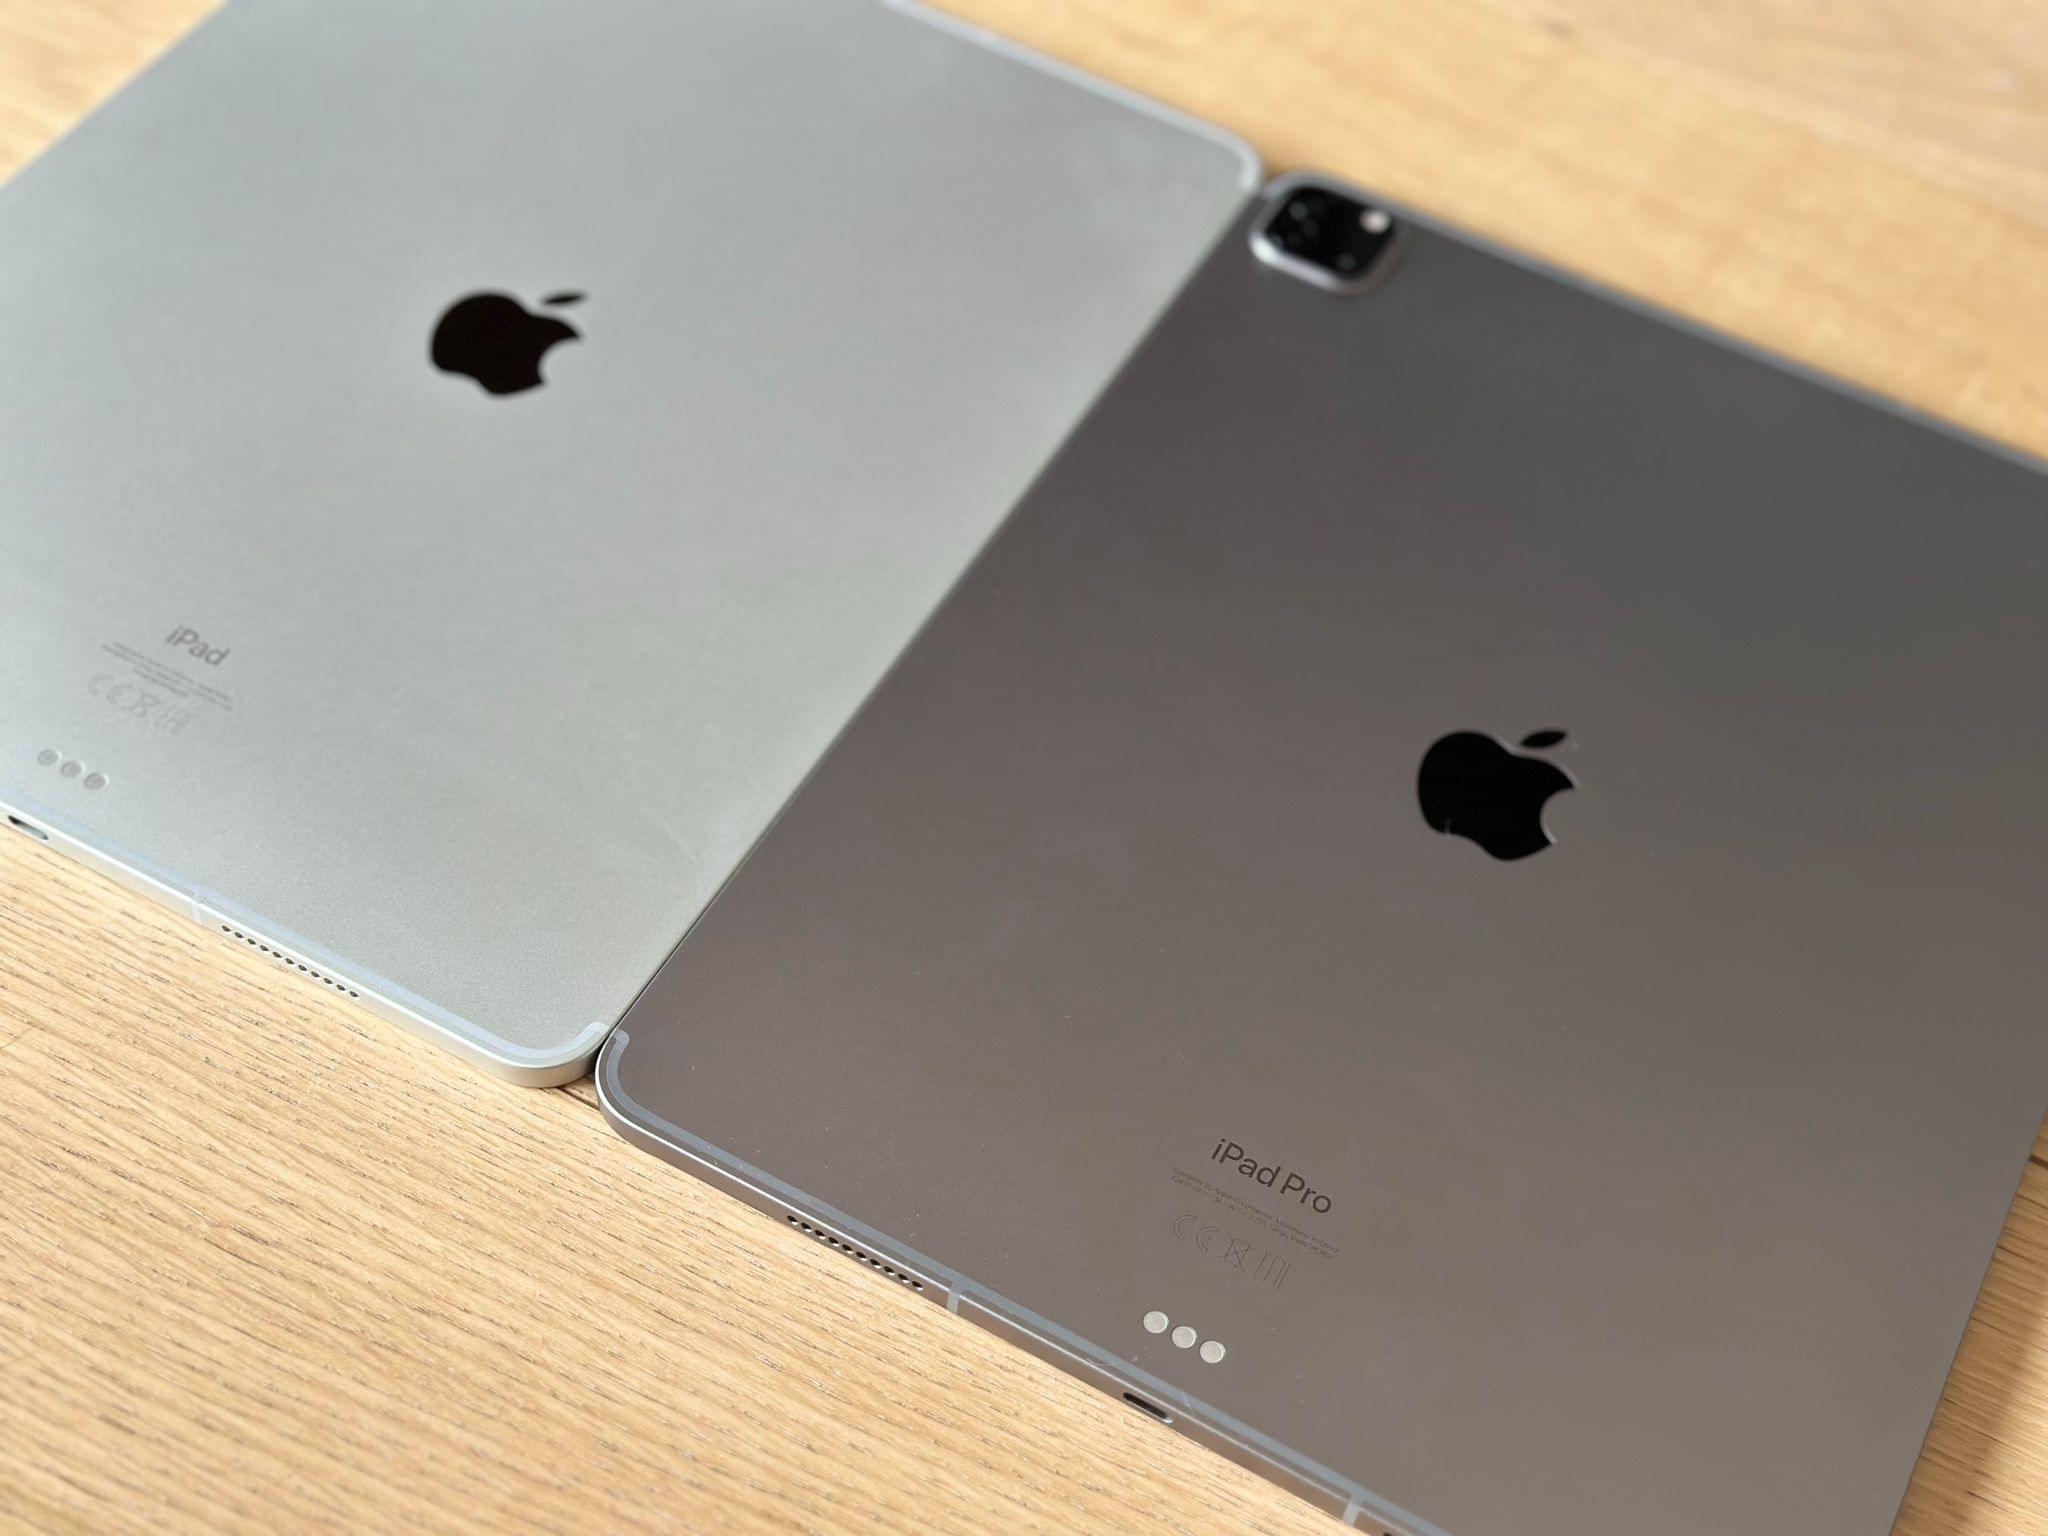 The new iPad Pro (right) is identical to the 2021 model, but it says 'iPad Pro' in the back instead of just 'iPad'.